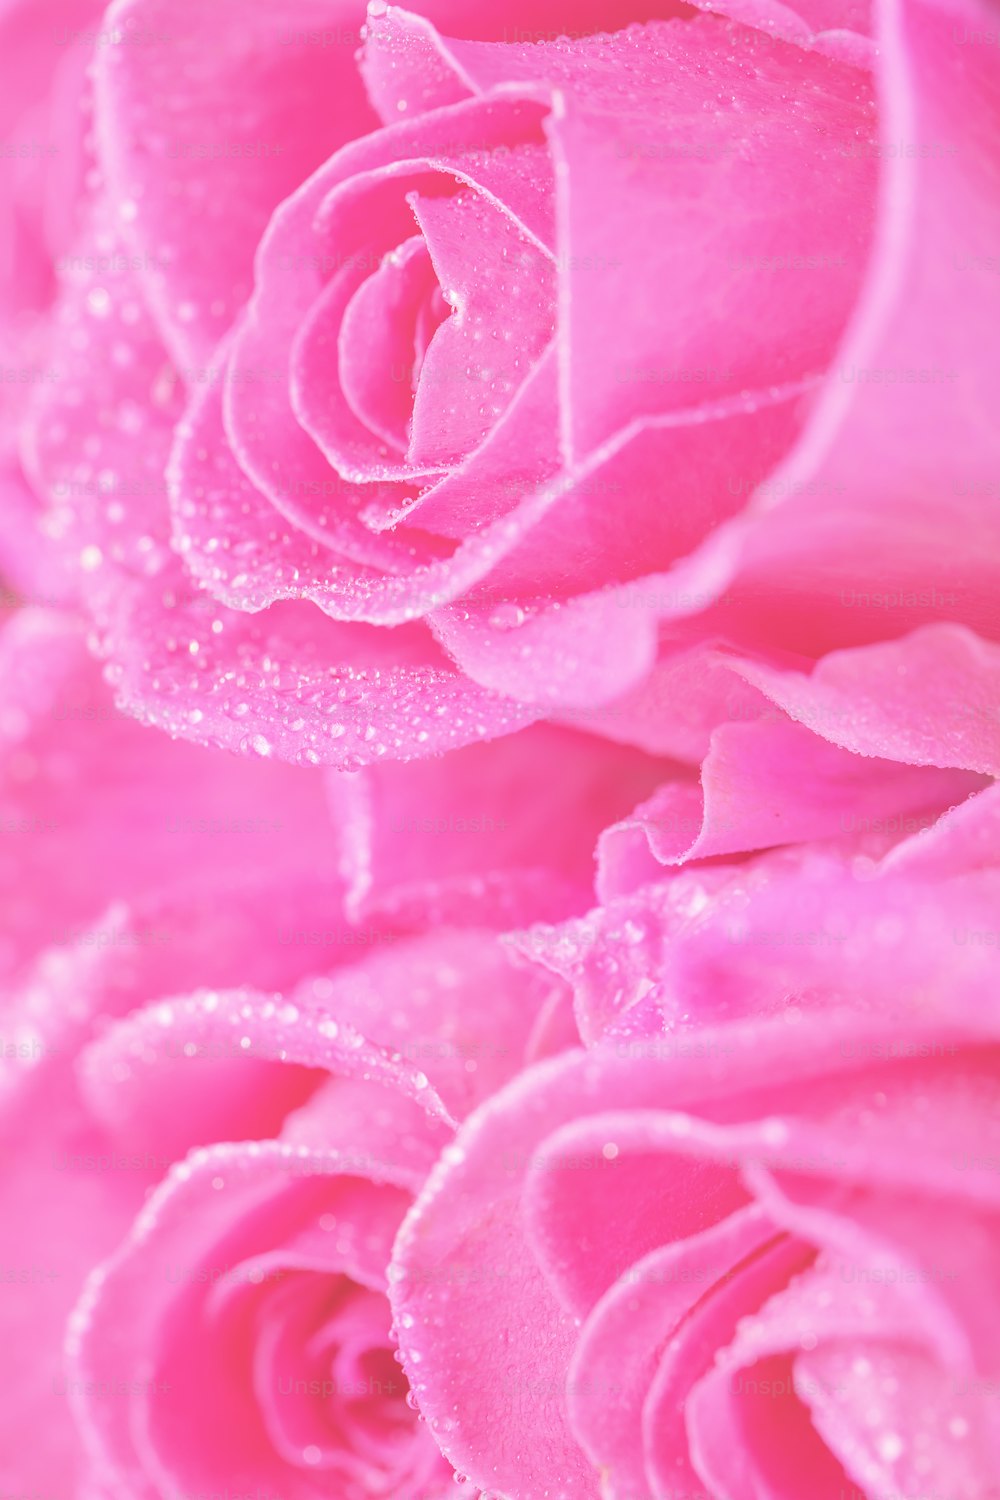 a close up of a pink rose with water droplets